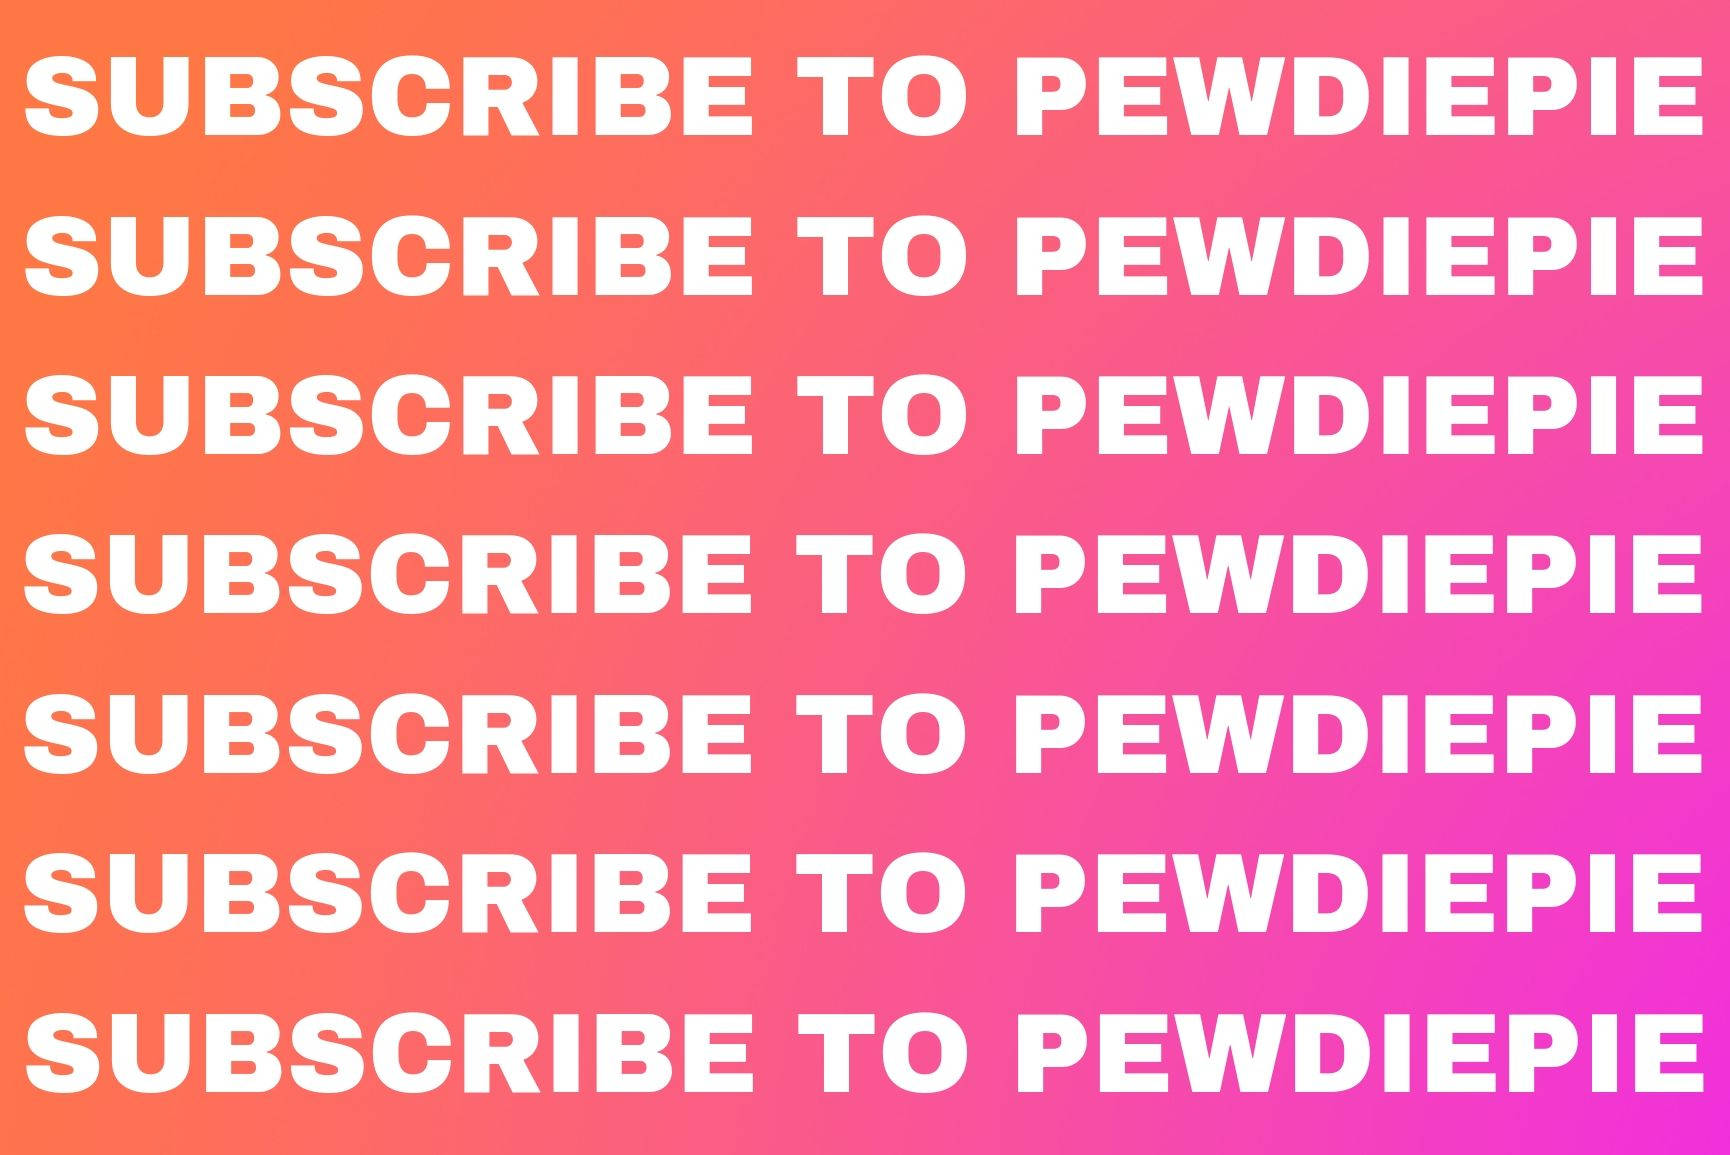 Subscribe Now To Follow Pewdiepie!